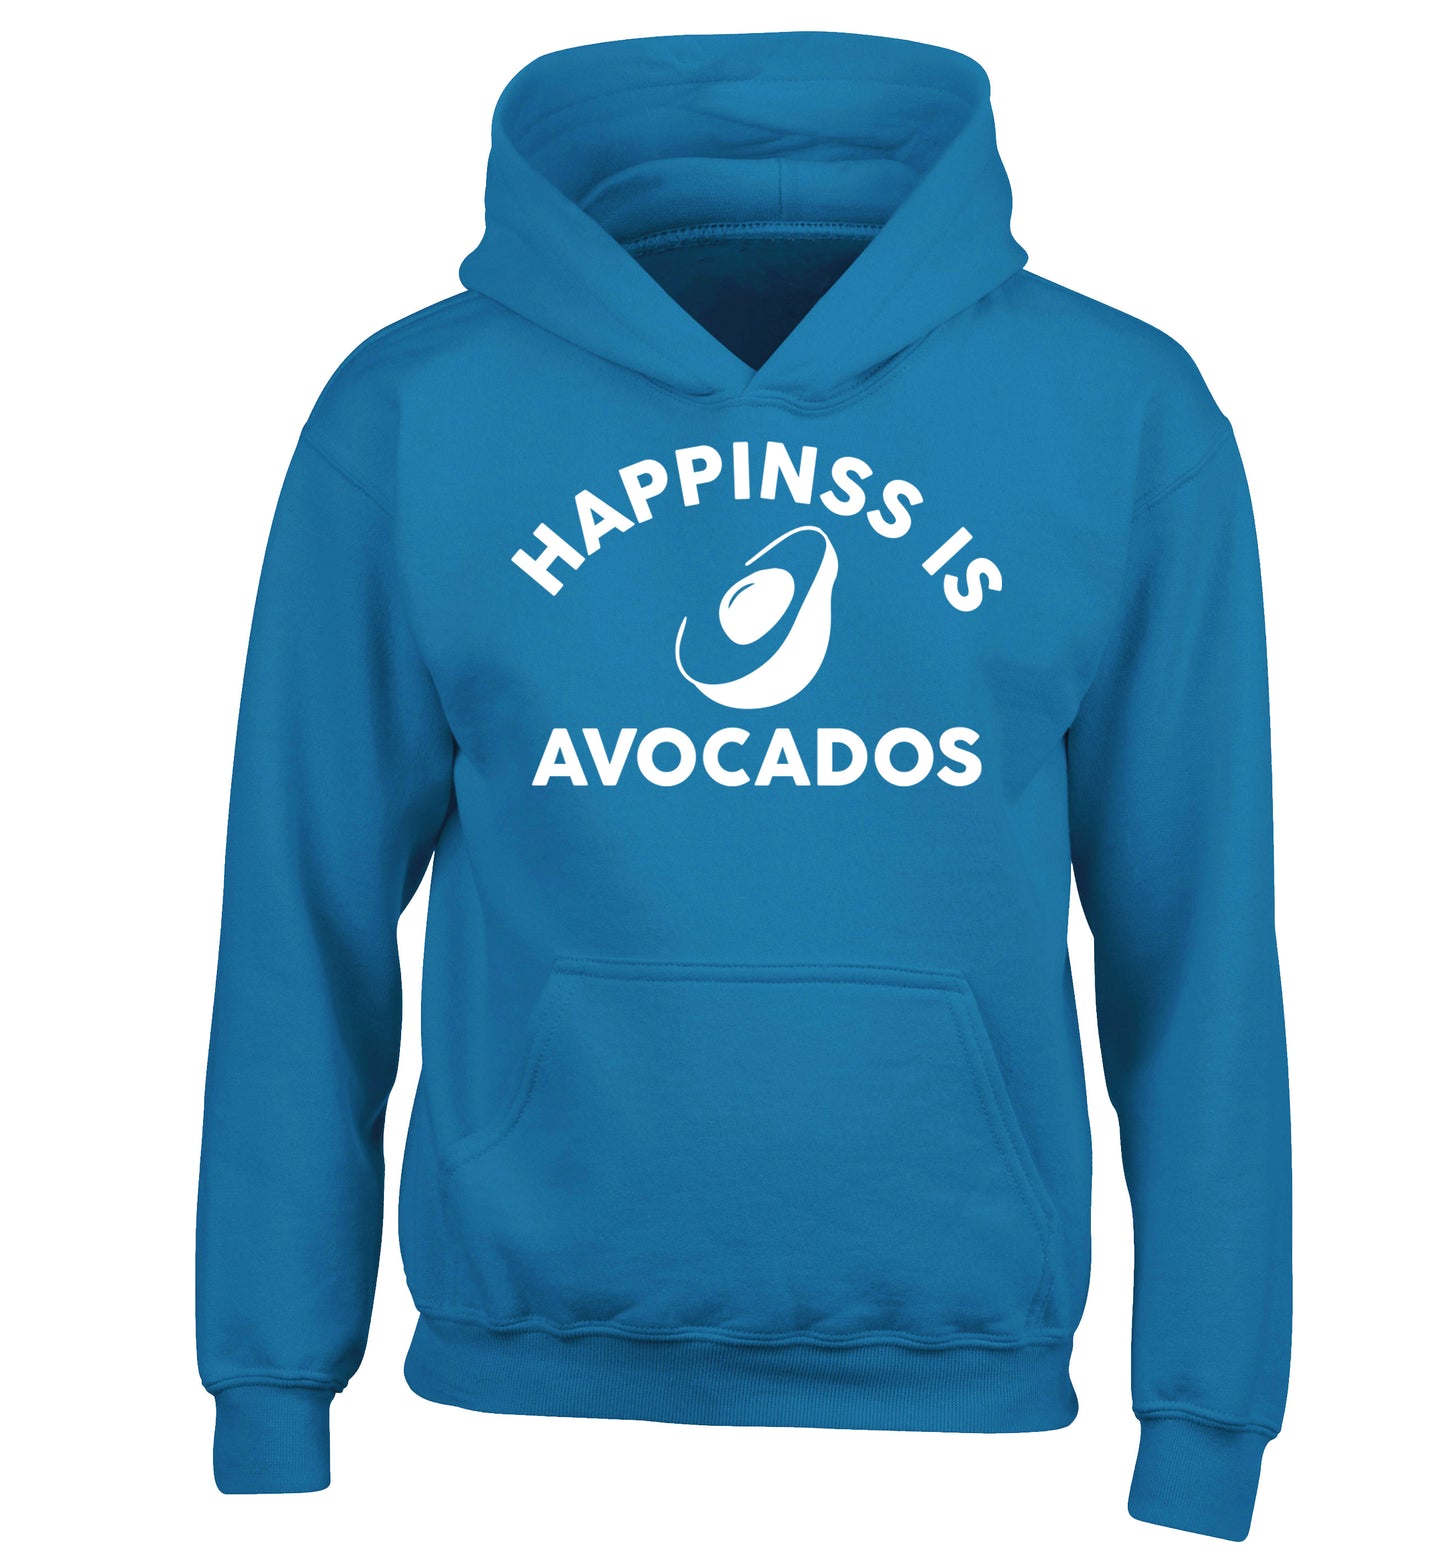 Happiness is avocados children's blue hoodie 12-14 Years